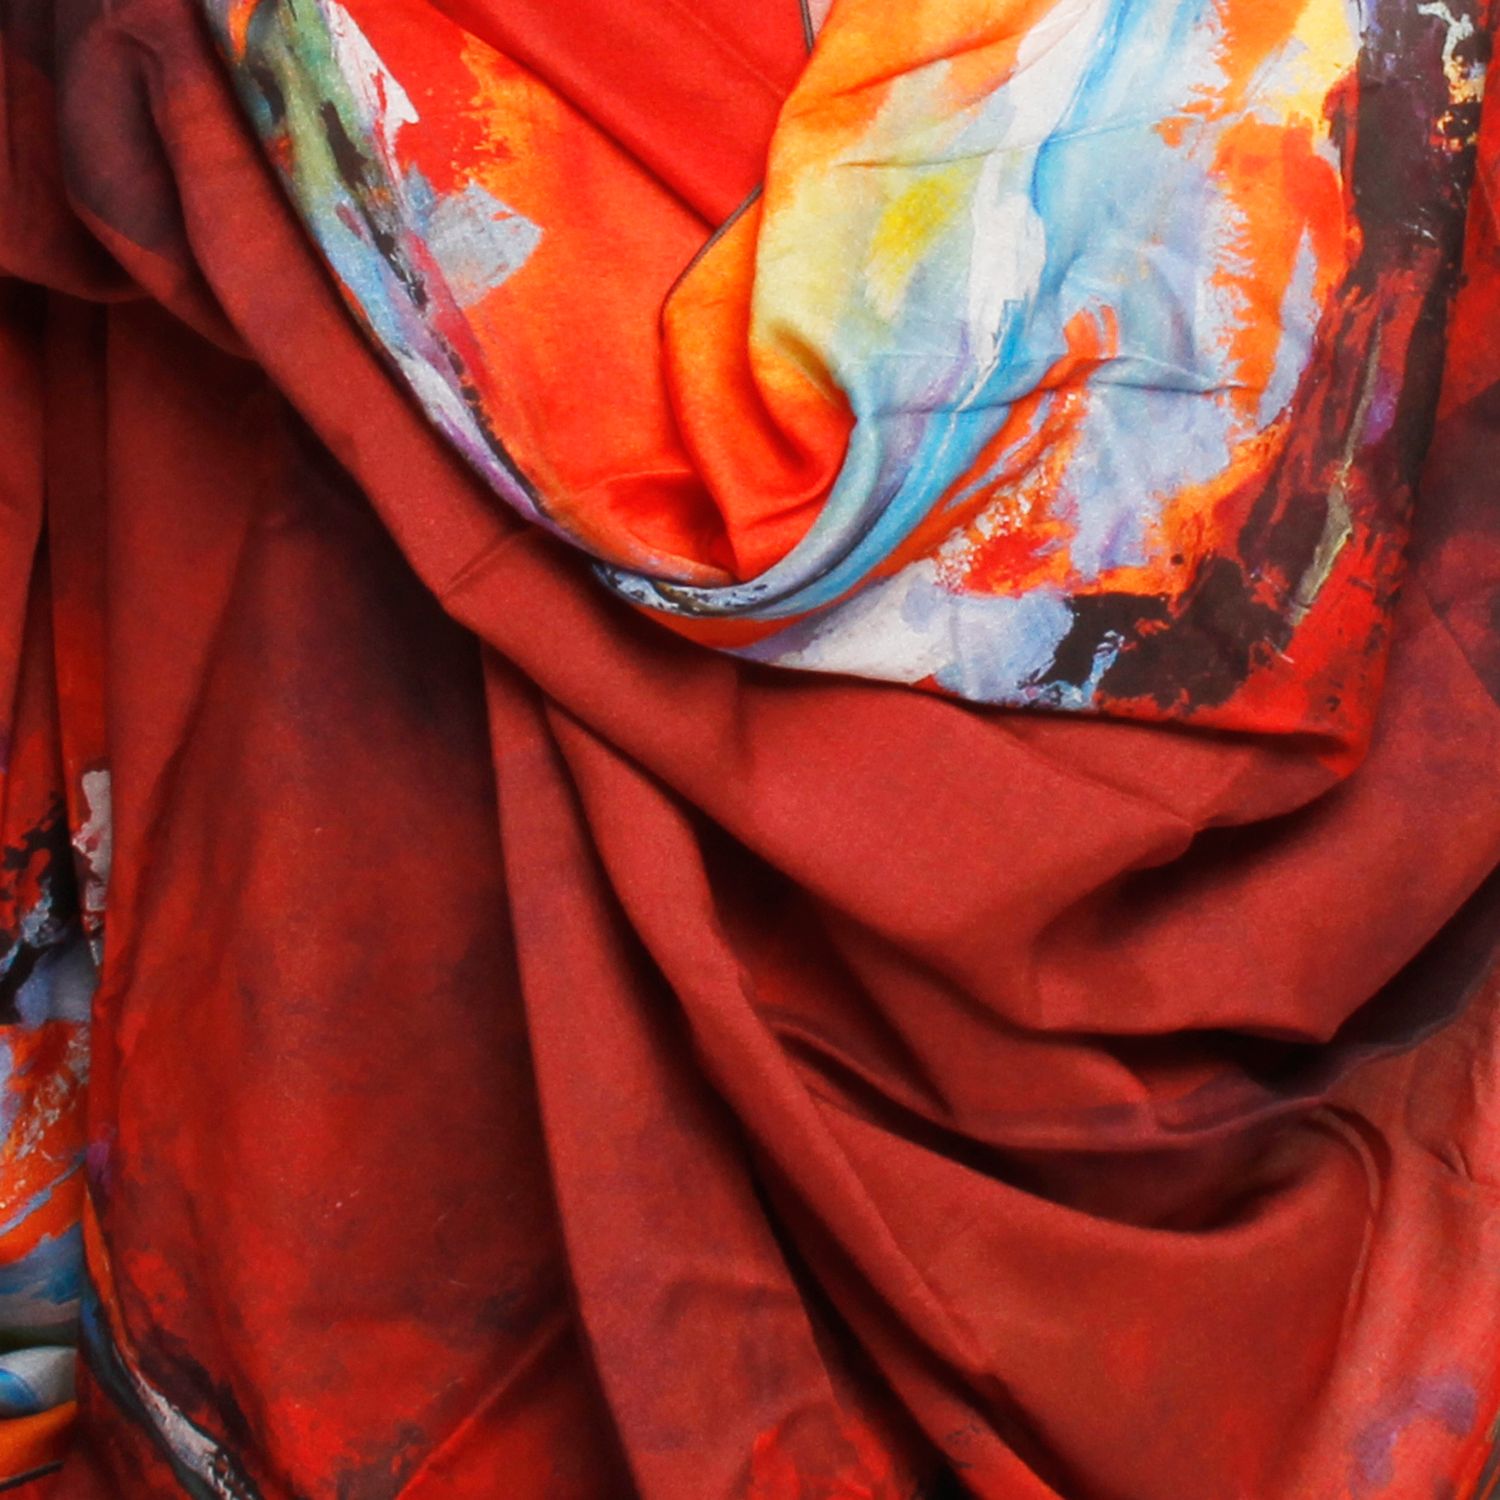 Lydia Panart: Symphony in Red Scarf Product Image 3 of 4